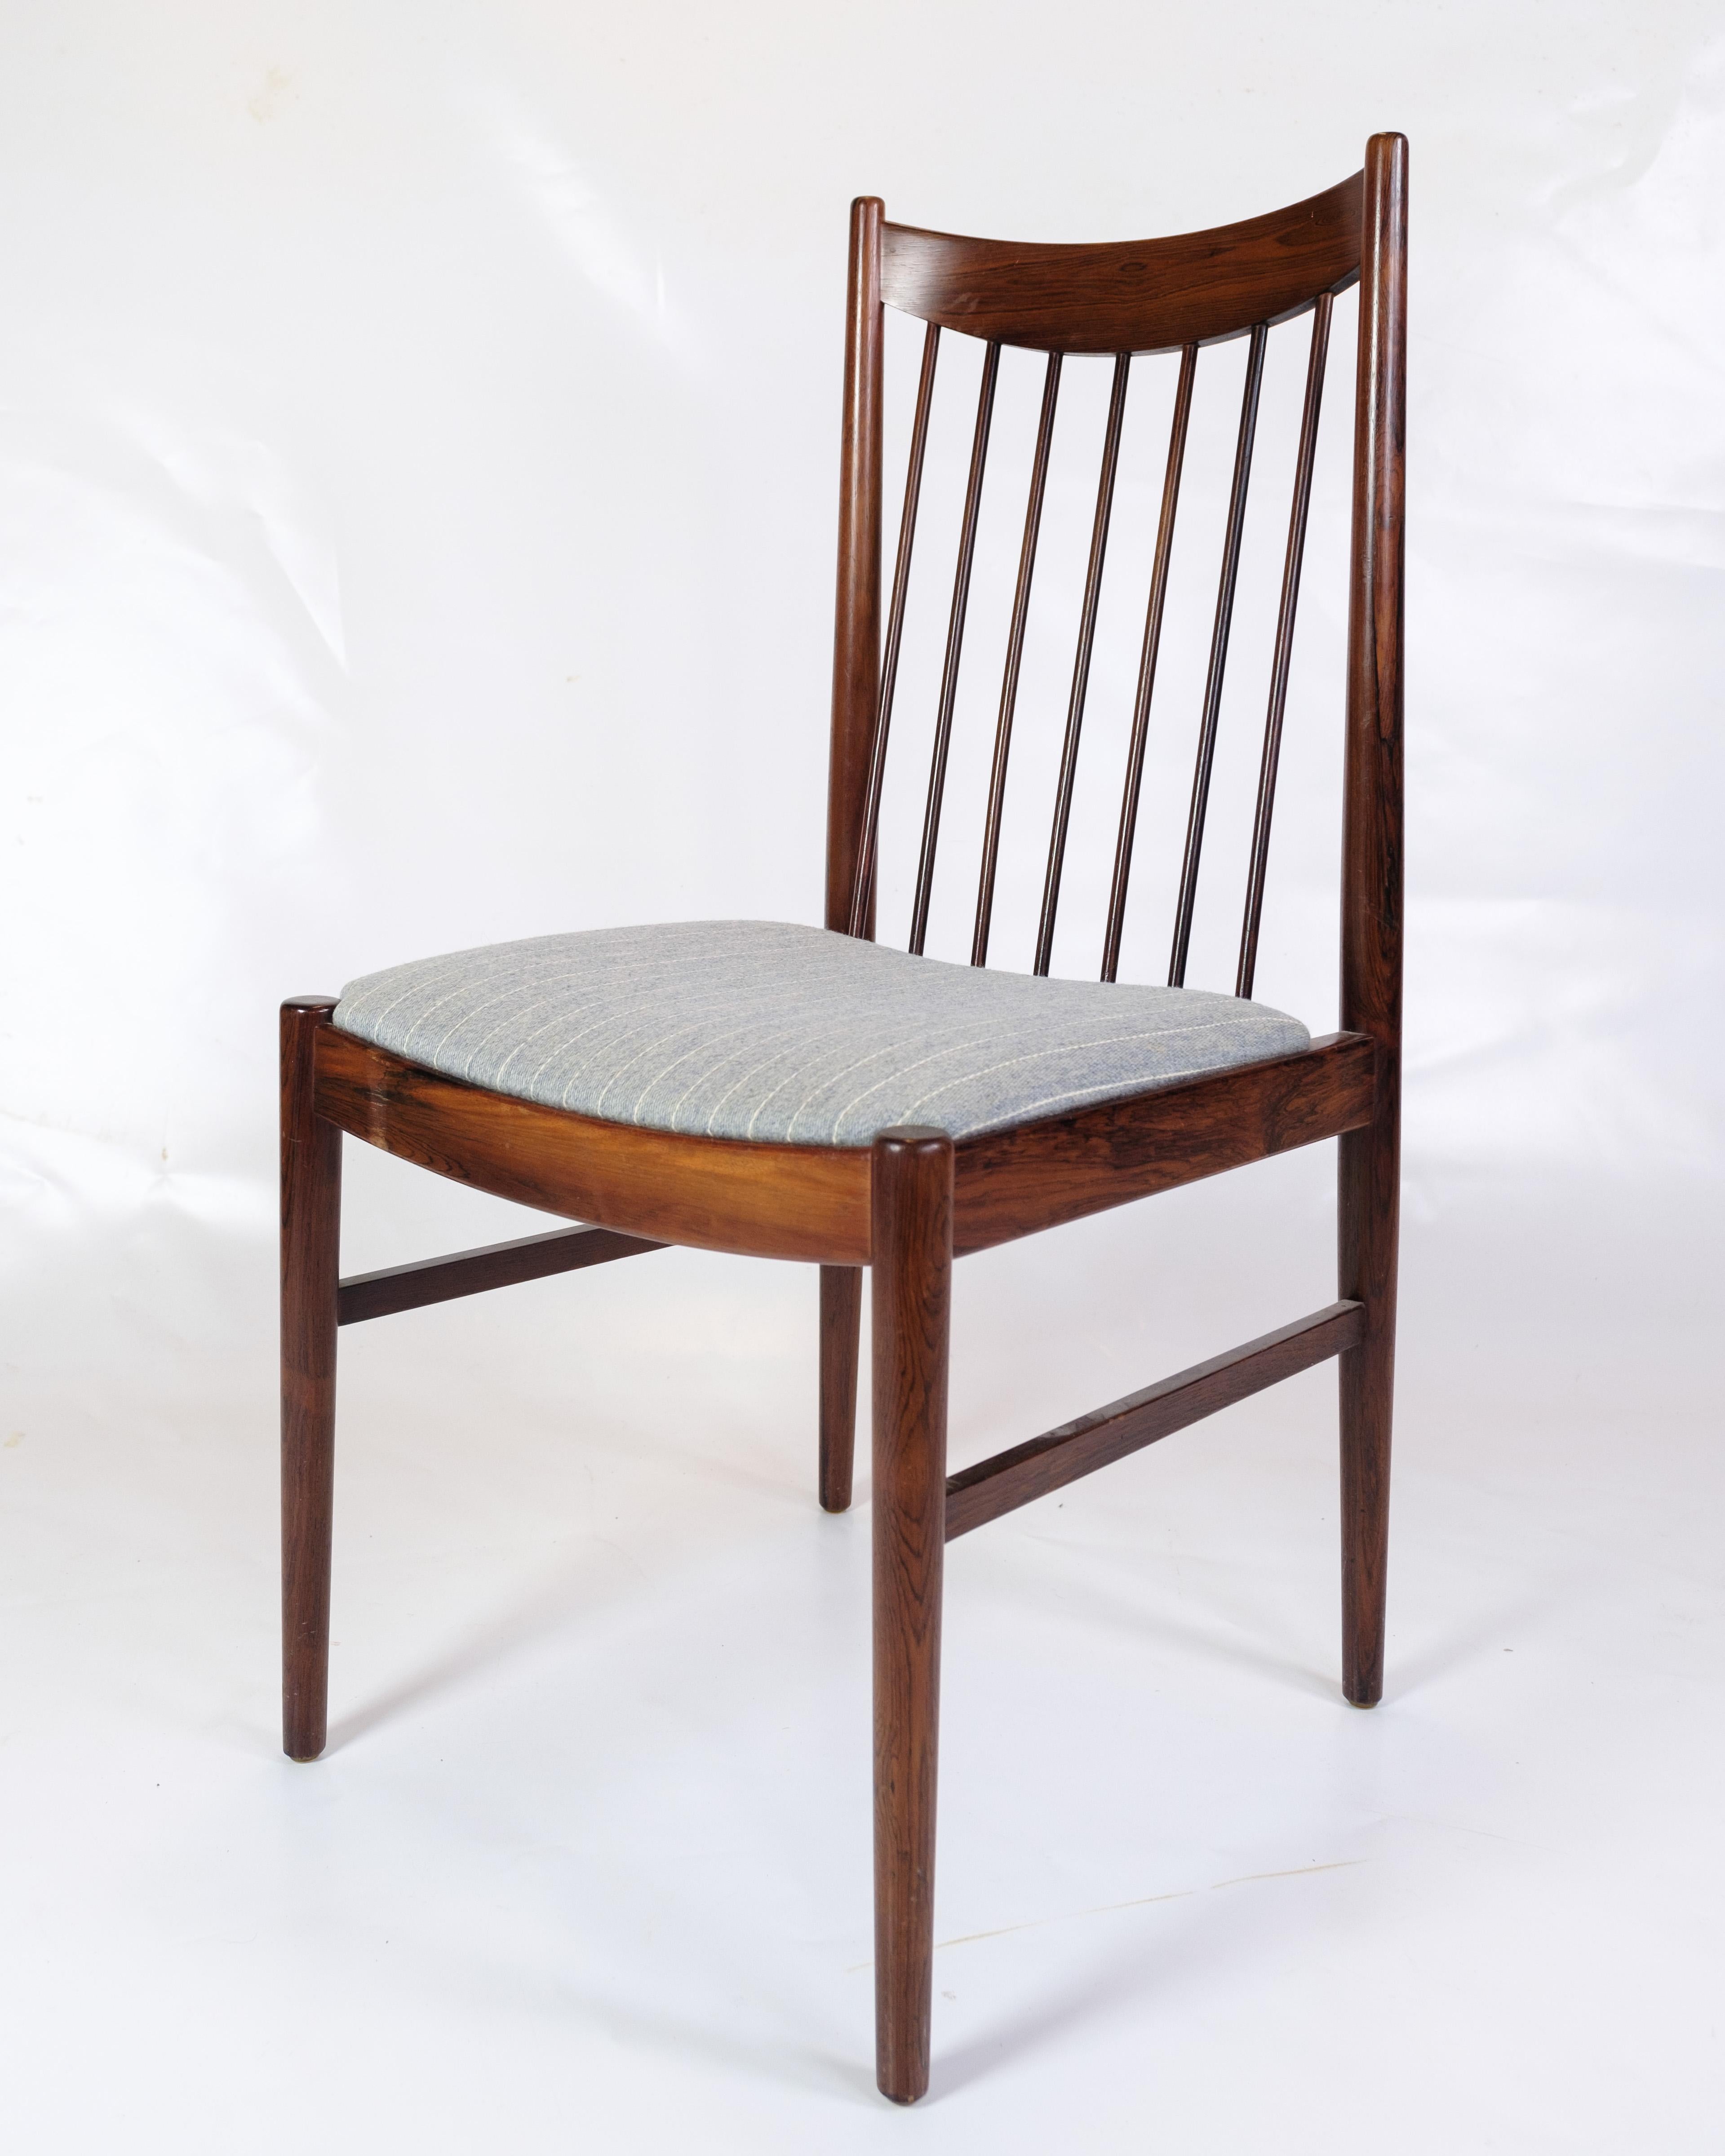 Danish Set Of 4 Dining Room Chairs Model 422 Made In Rosewood By Arne Vodder From 1960s For Sale